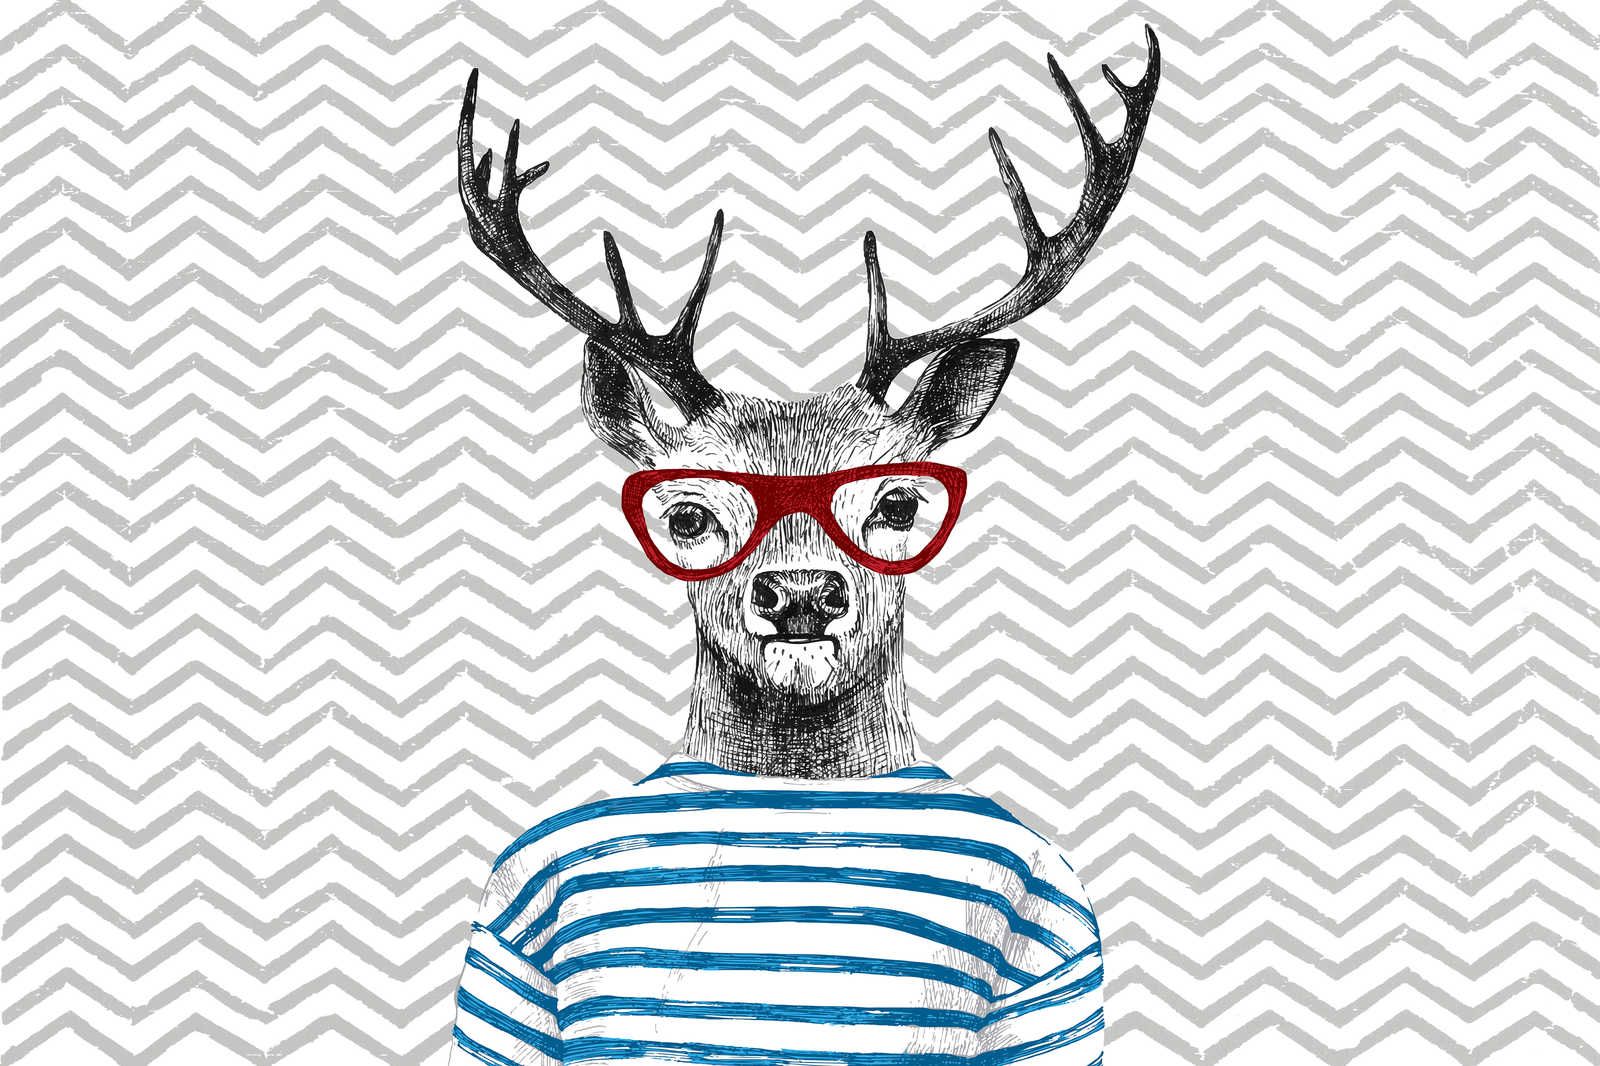             Children's Room Canvas Painting Comic Design, Deer with Glasses - 1.20 m x 0.80 m
        